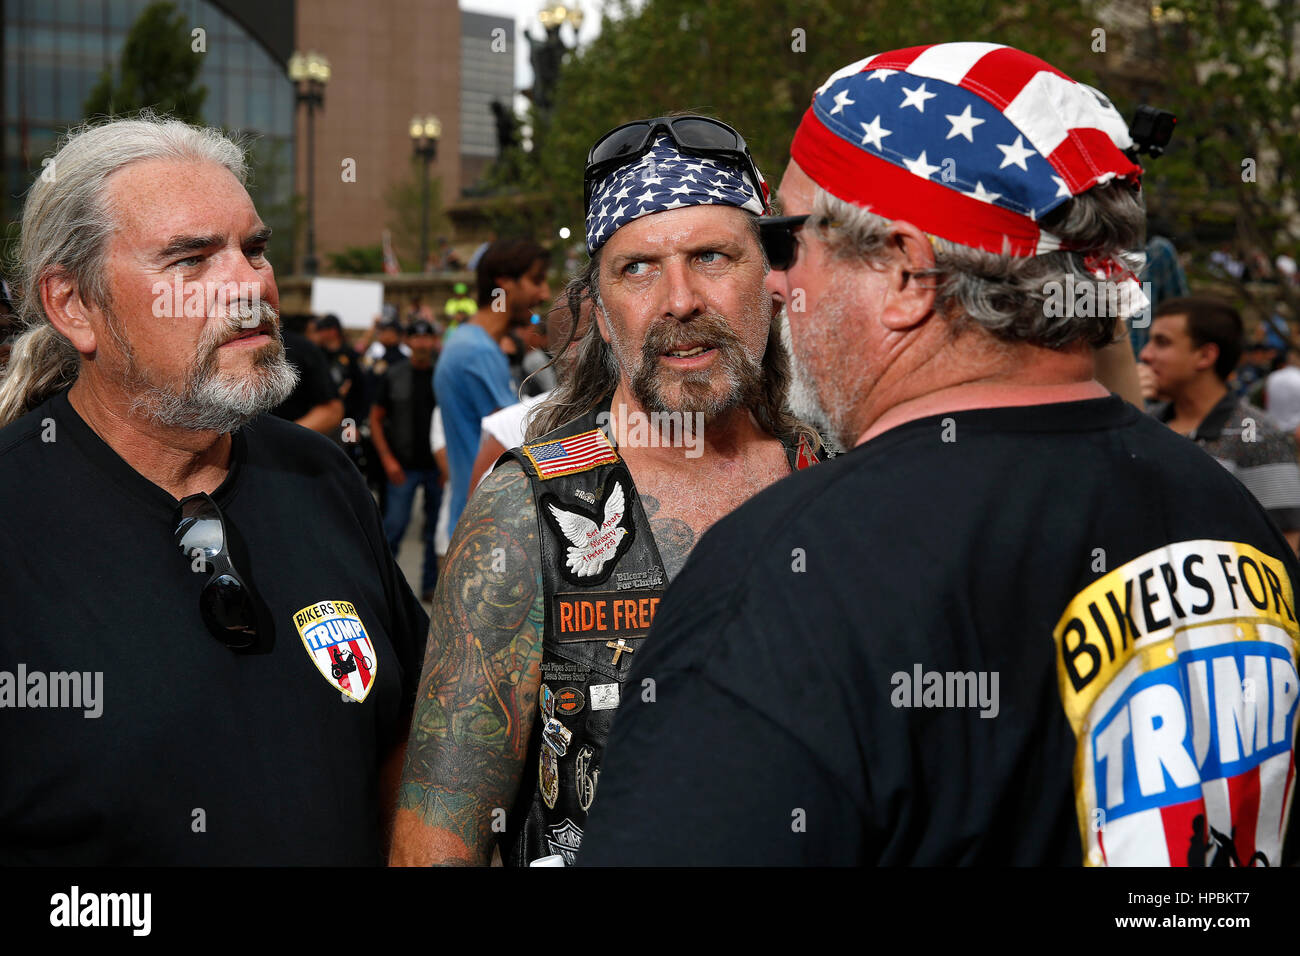 Members of the group Bikers for Trump talk during a heated protest outside of the Republican National Convention on July 21, 2016. Cleveland, Ohio, Un Stock Photo